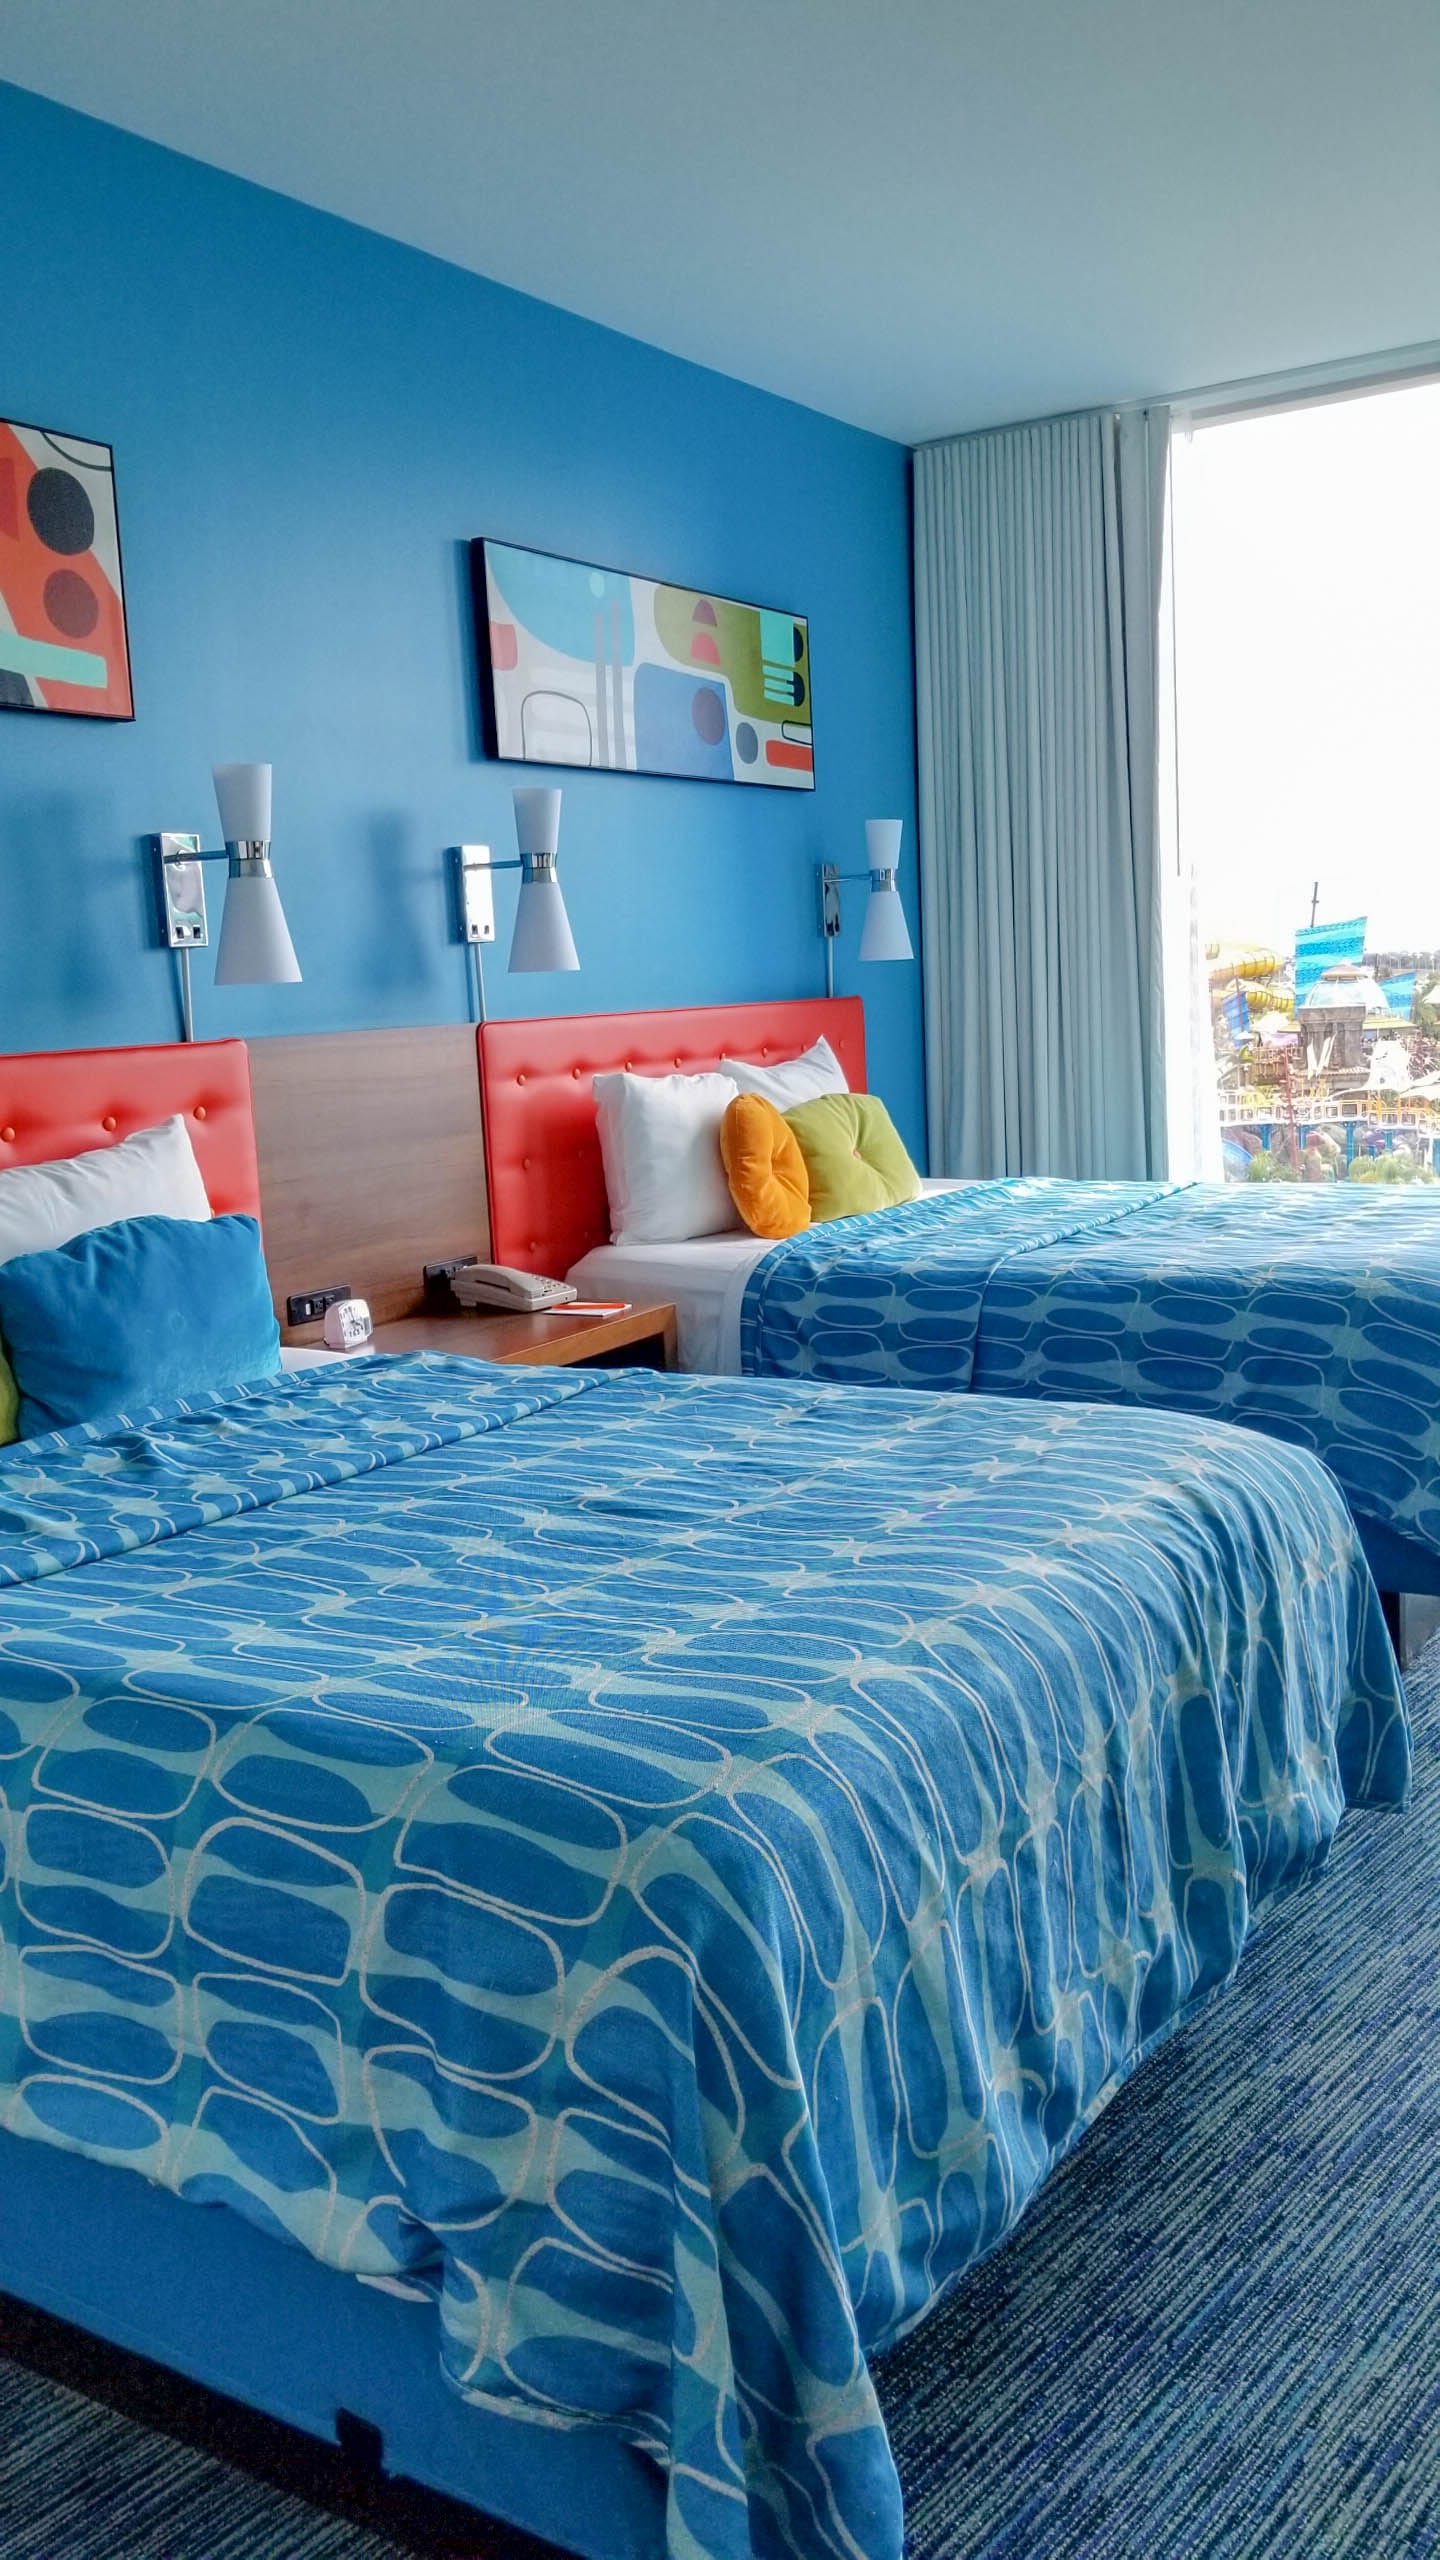 Staying at Universal's Cabana Bay Beach Resort is like stepping back into the iconic 1950s and '60s. The retro themed Central Florida resort offers many conveniences and ways to have fun or relax. The resort is conveniently located steps away from Universal's Volcano Bay water park with a private entrance for guests.